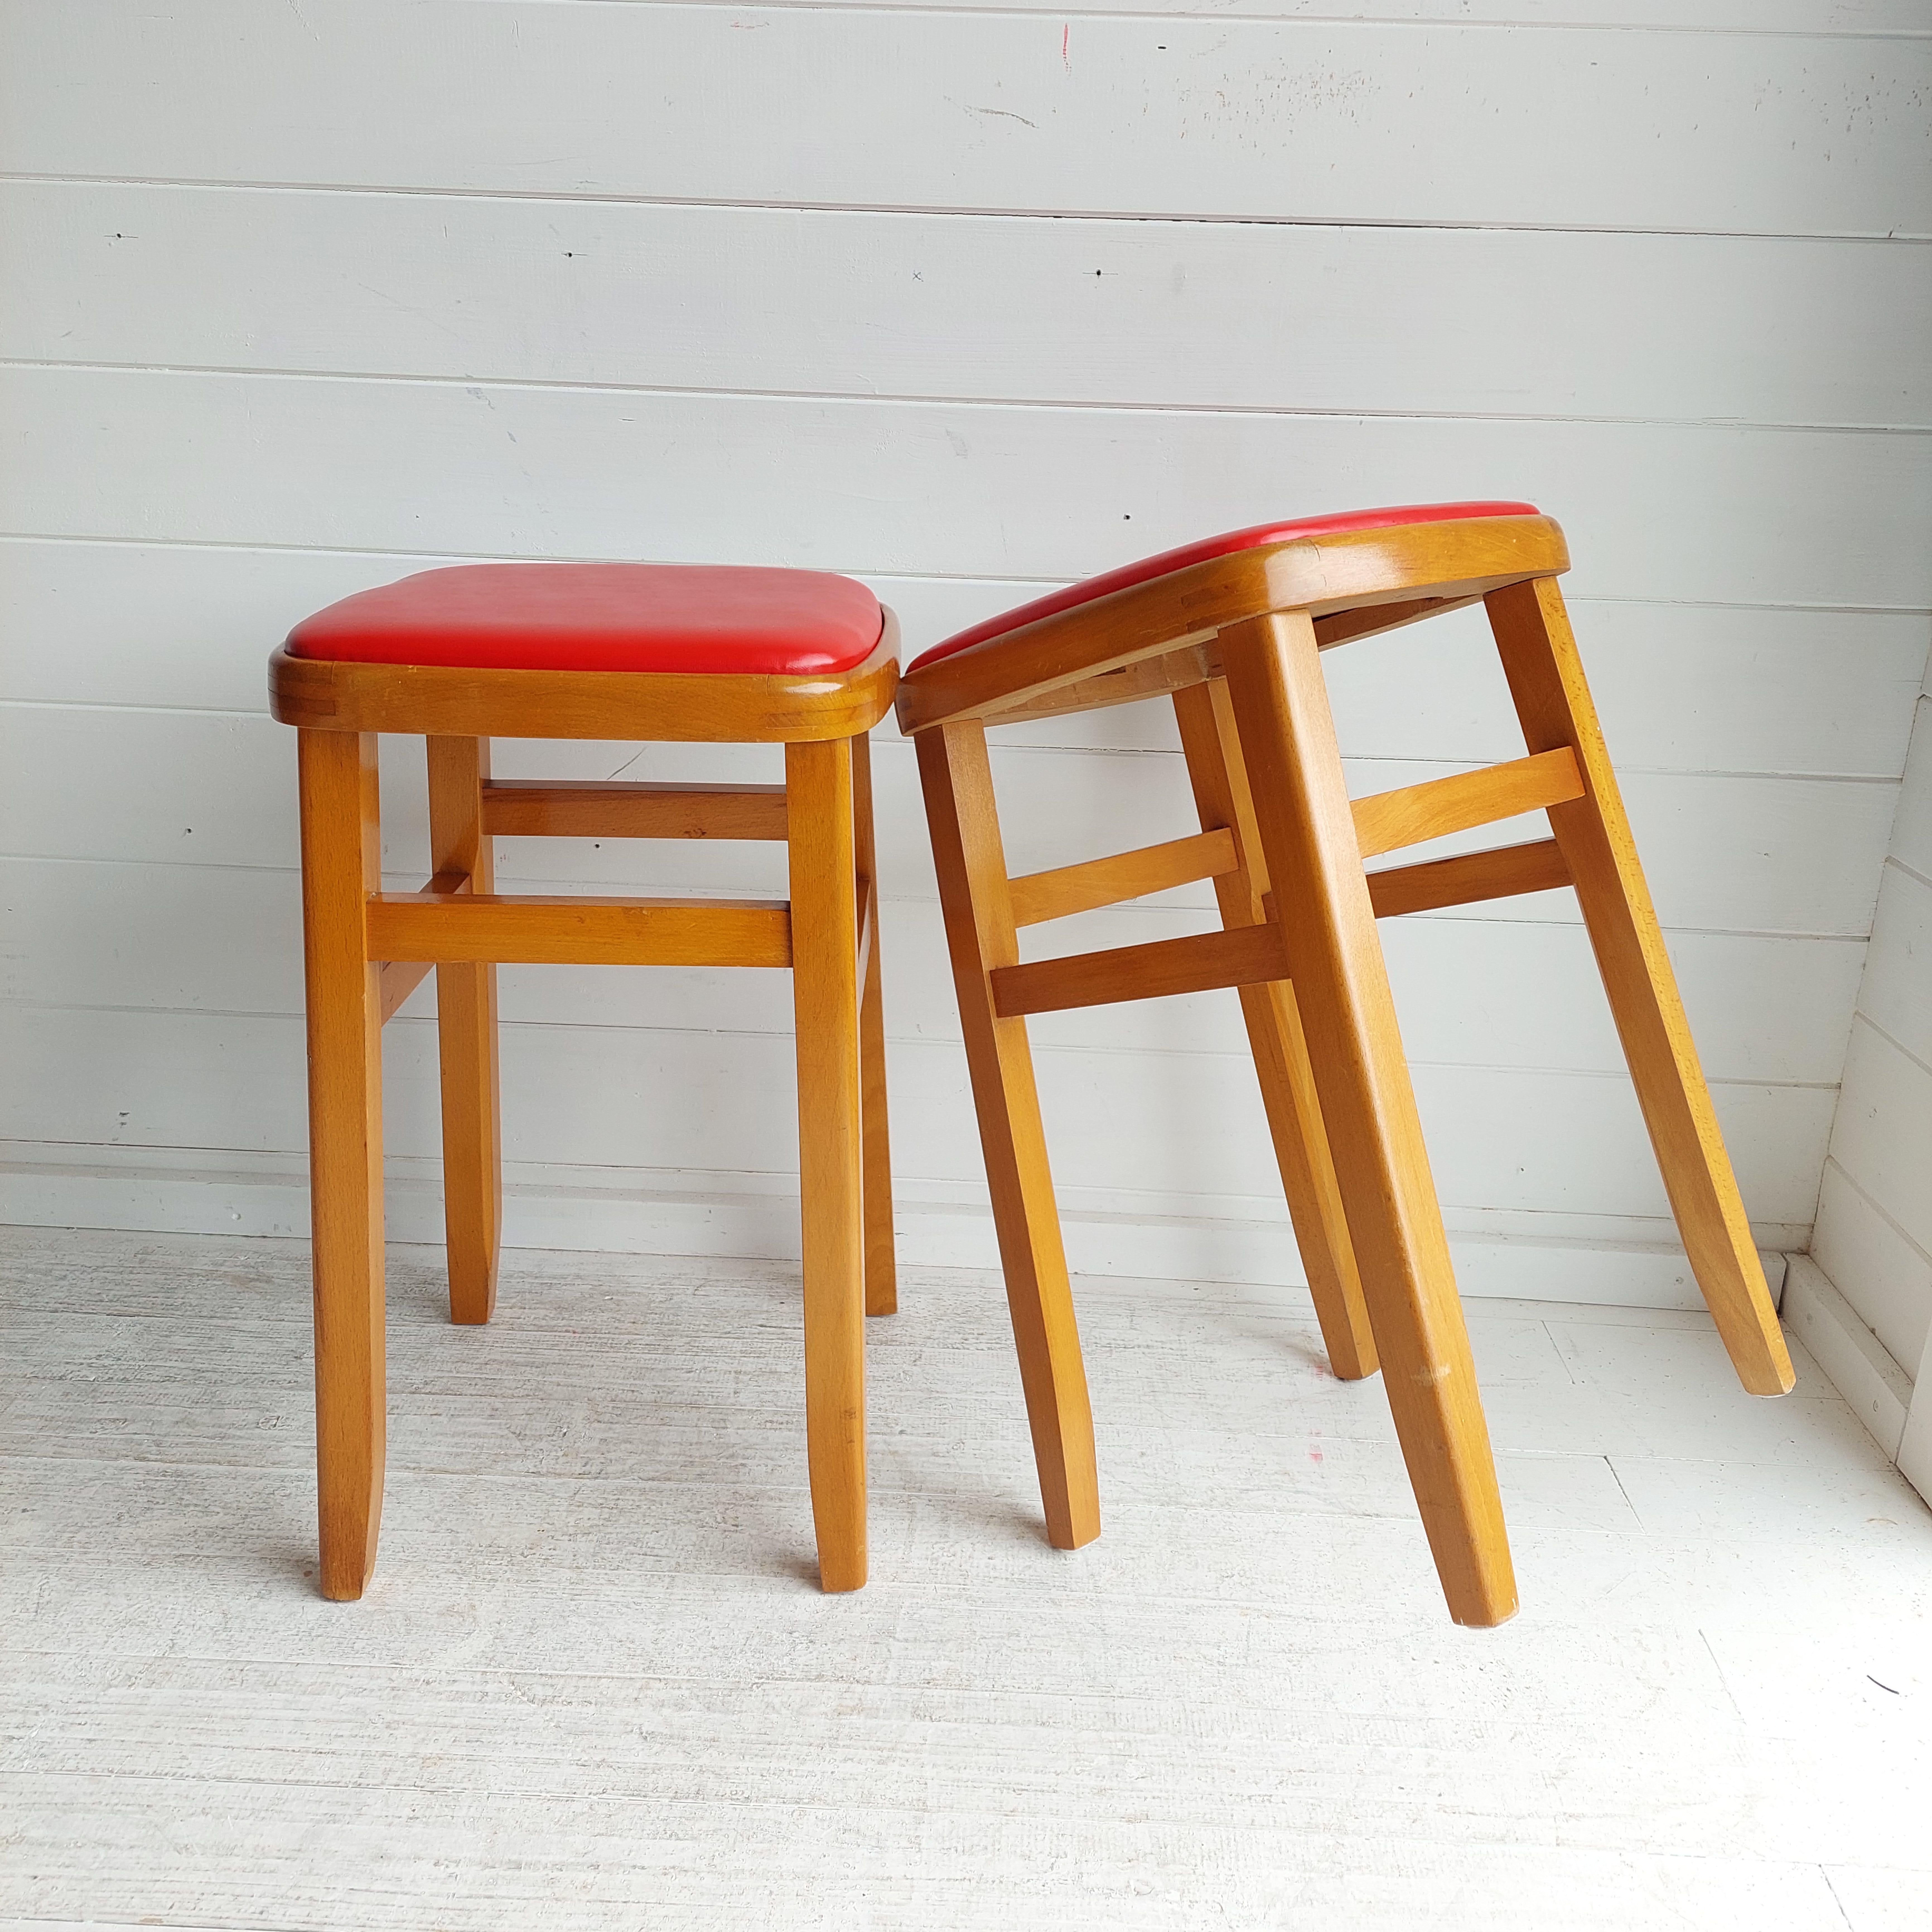 Pair of solid wooden kitchen stool, with leather effect / vinyl tops.
A pair of classic beech frame stools. 
Made in their millions in the 1960s, good survivors after 60 years of service

Vintage Kitchen Stool Beech Wood with Red Vinyl Cover Mid